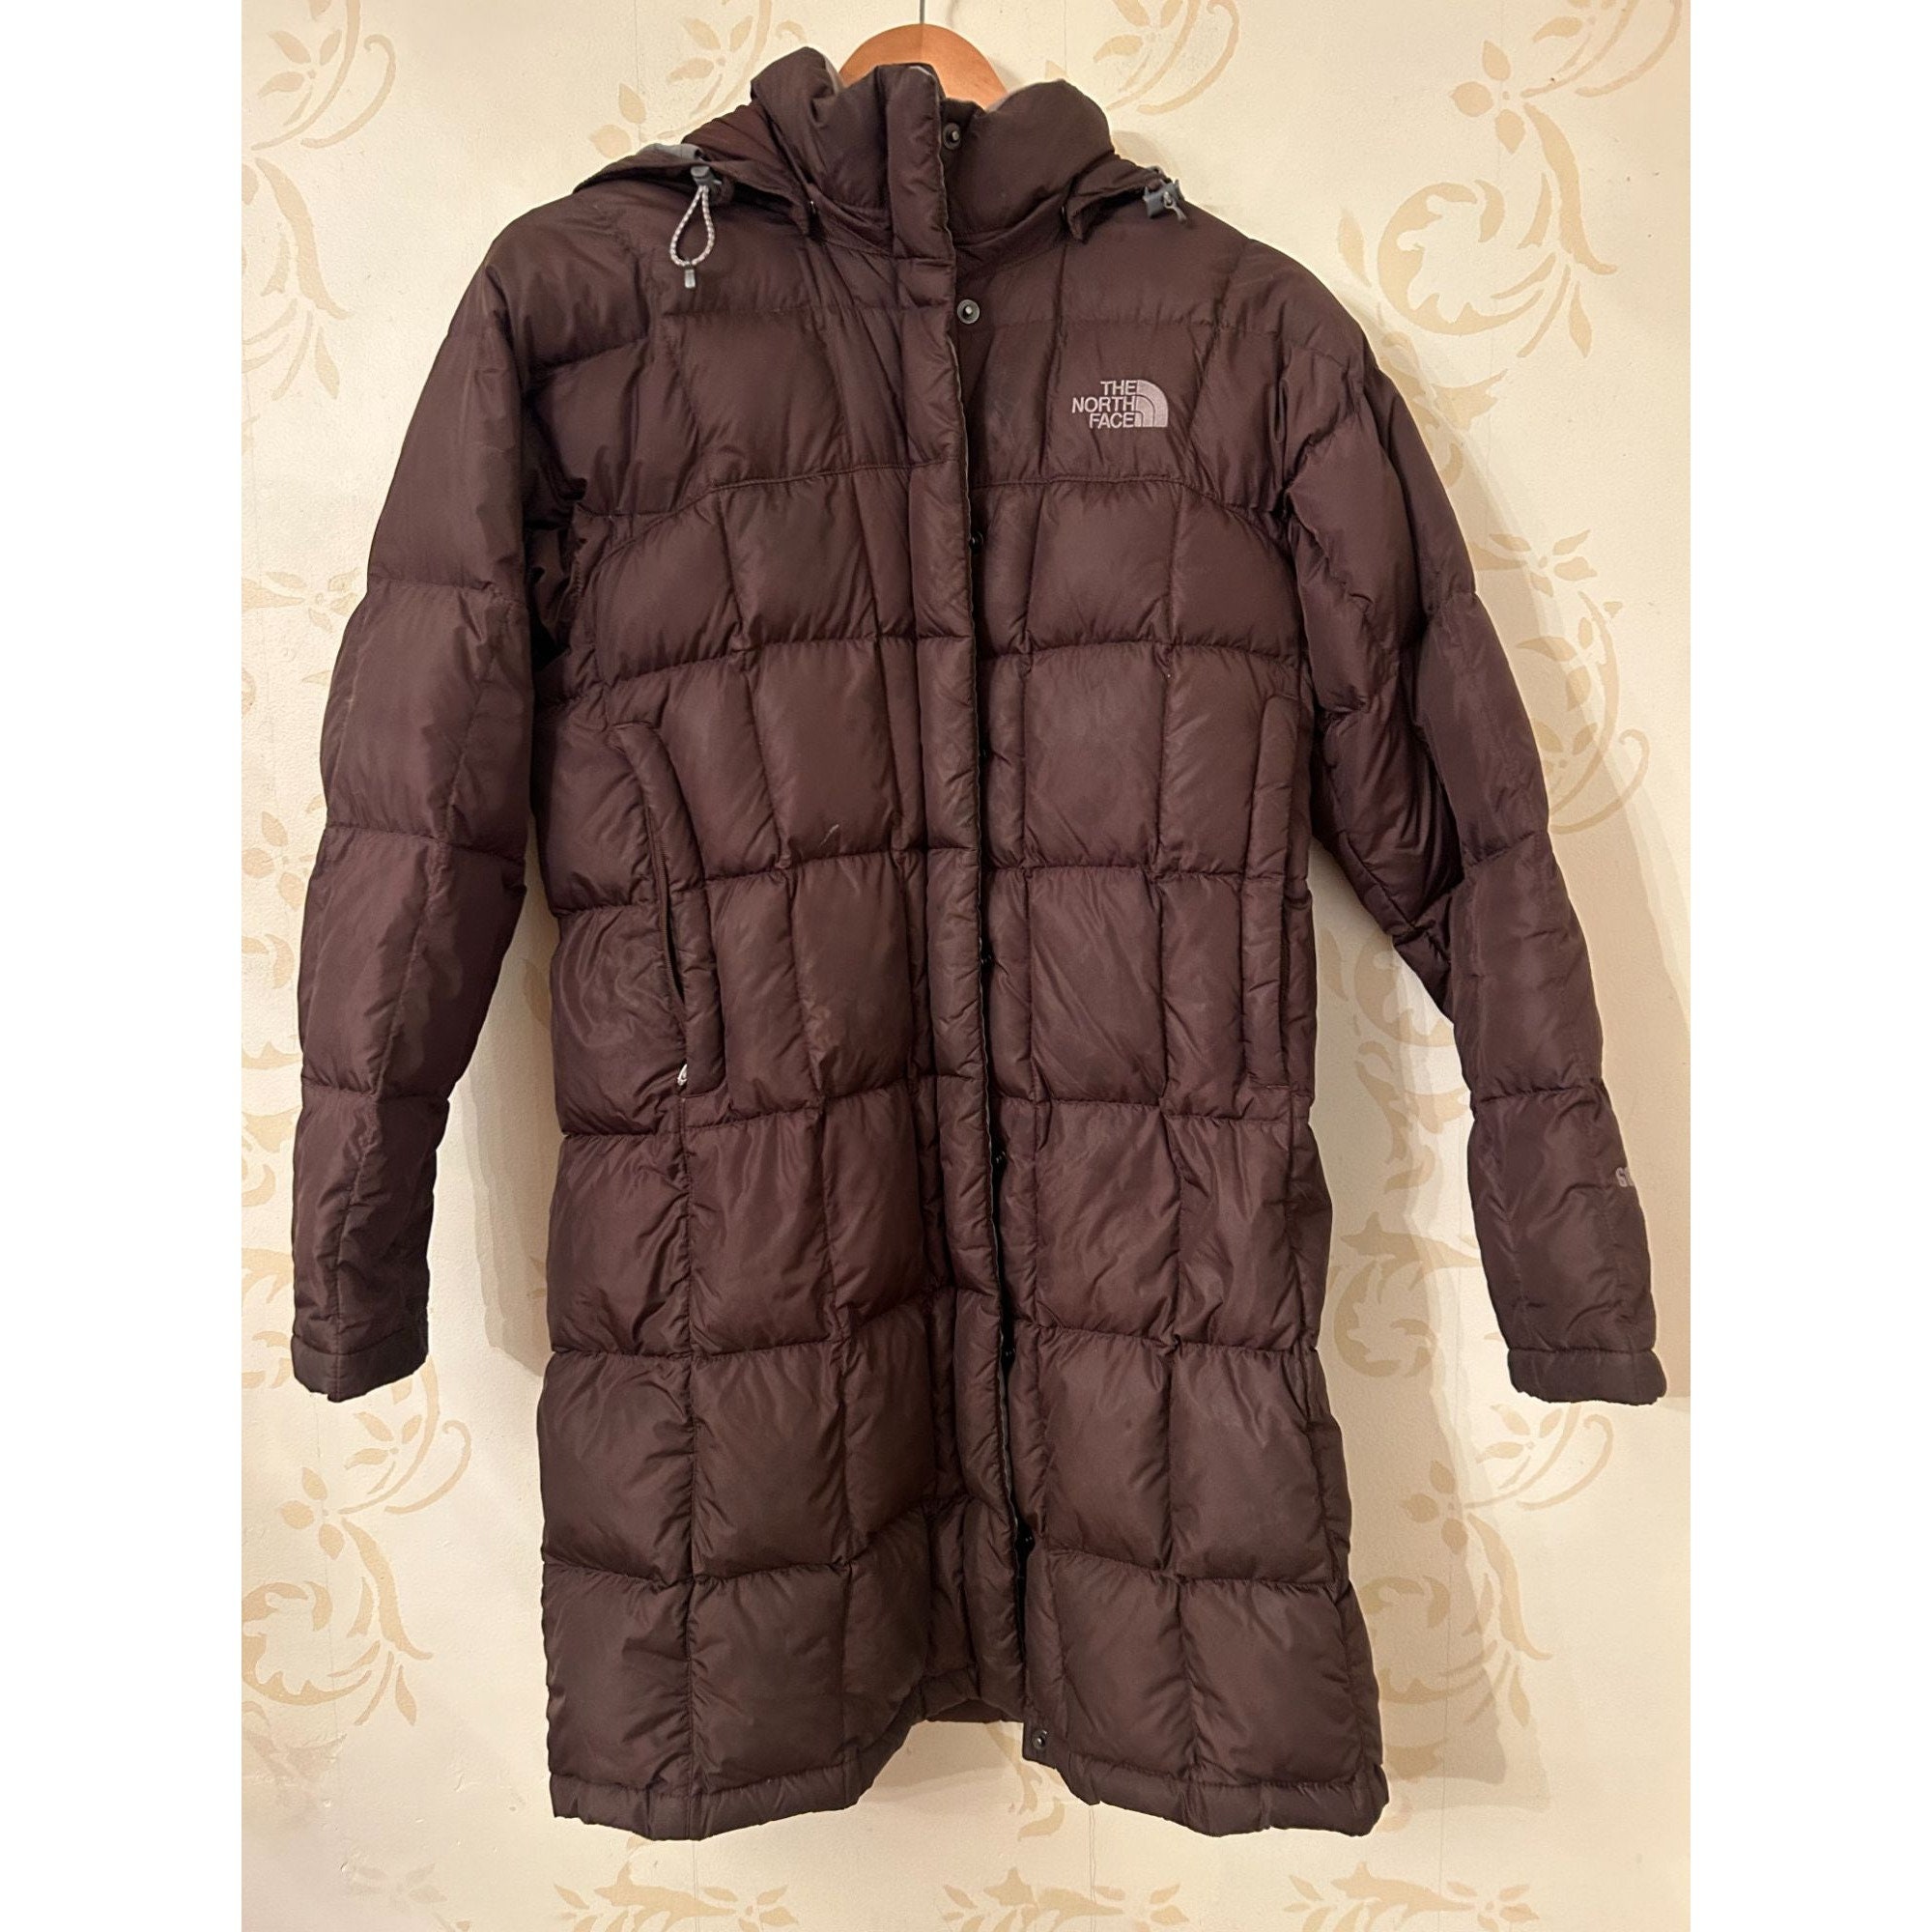 The North Face Jacket 600 Fill Goose Down Brown Puffer Girls Kids Size XXS